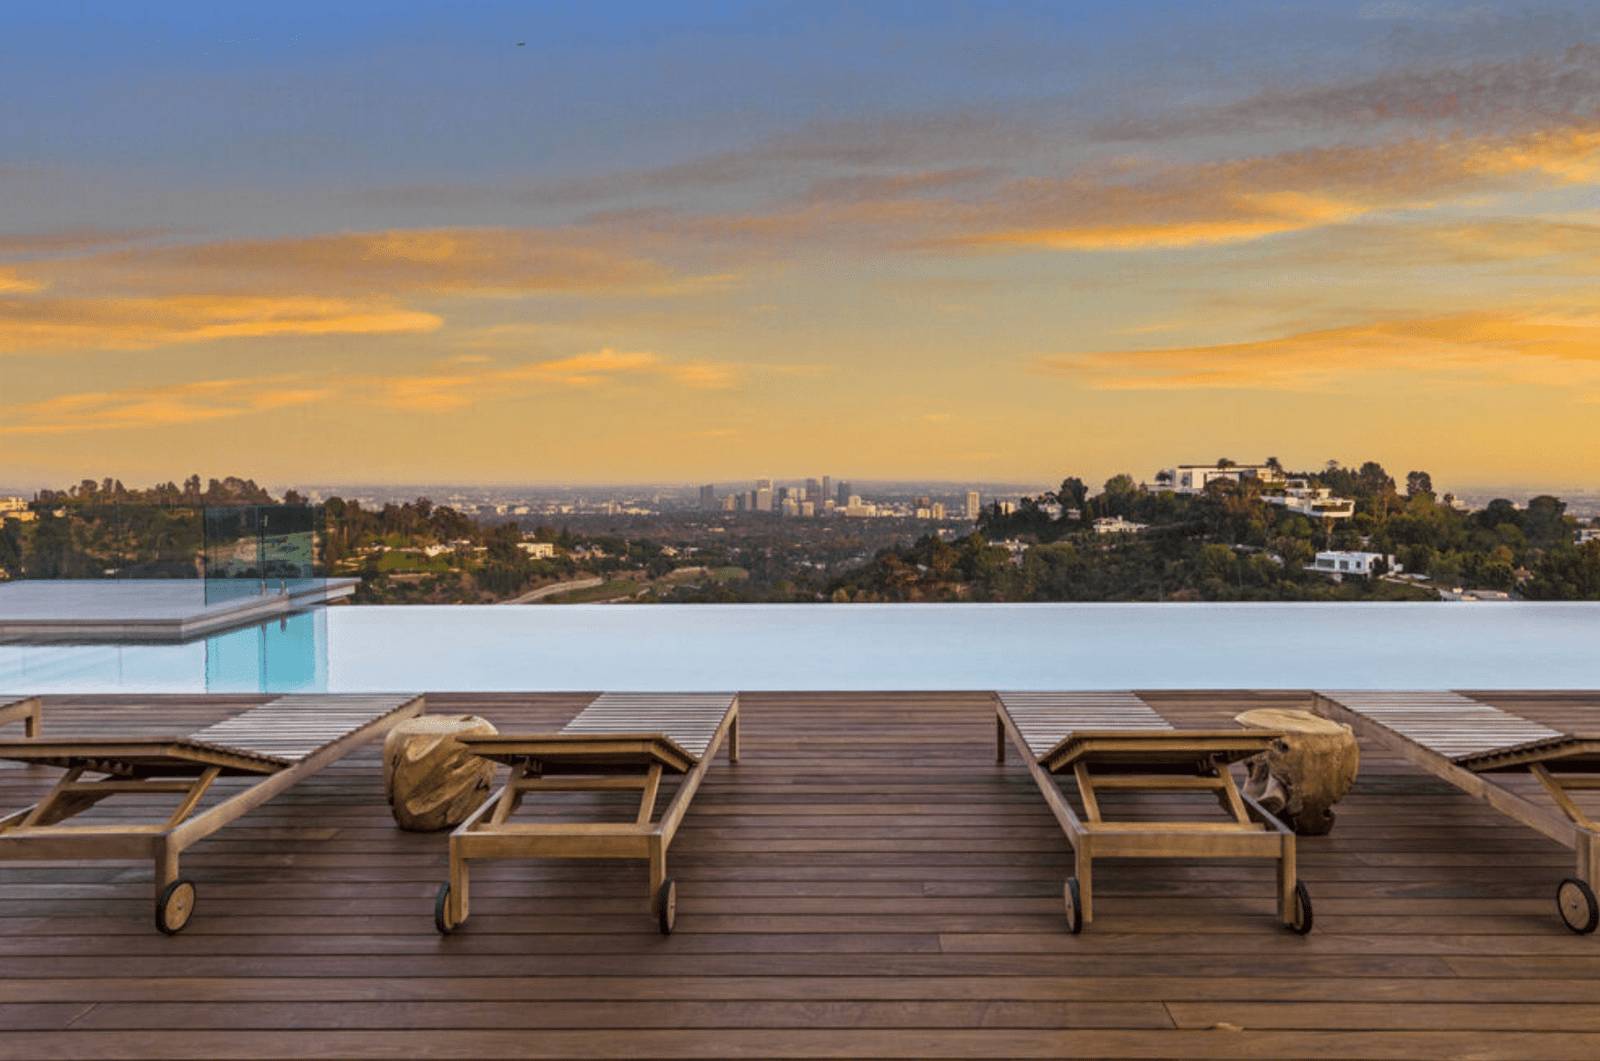 Luxury real estate - Private Mansion - Bel Air - Los Angeles - California